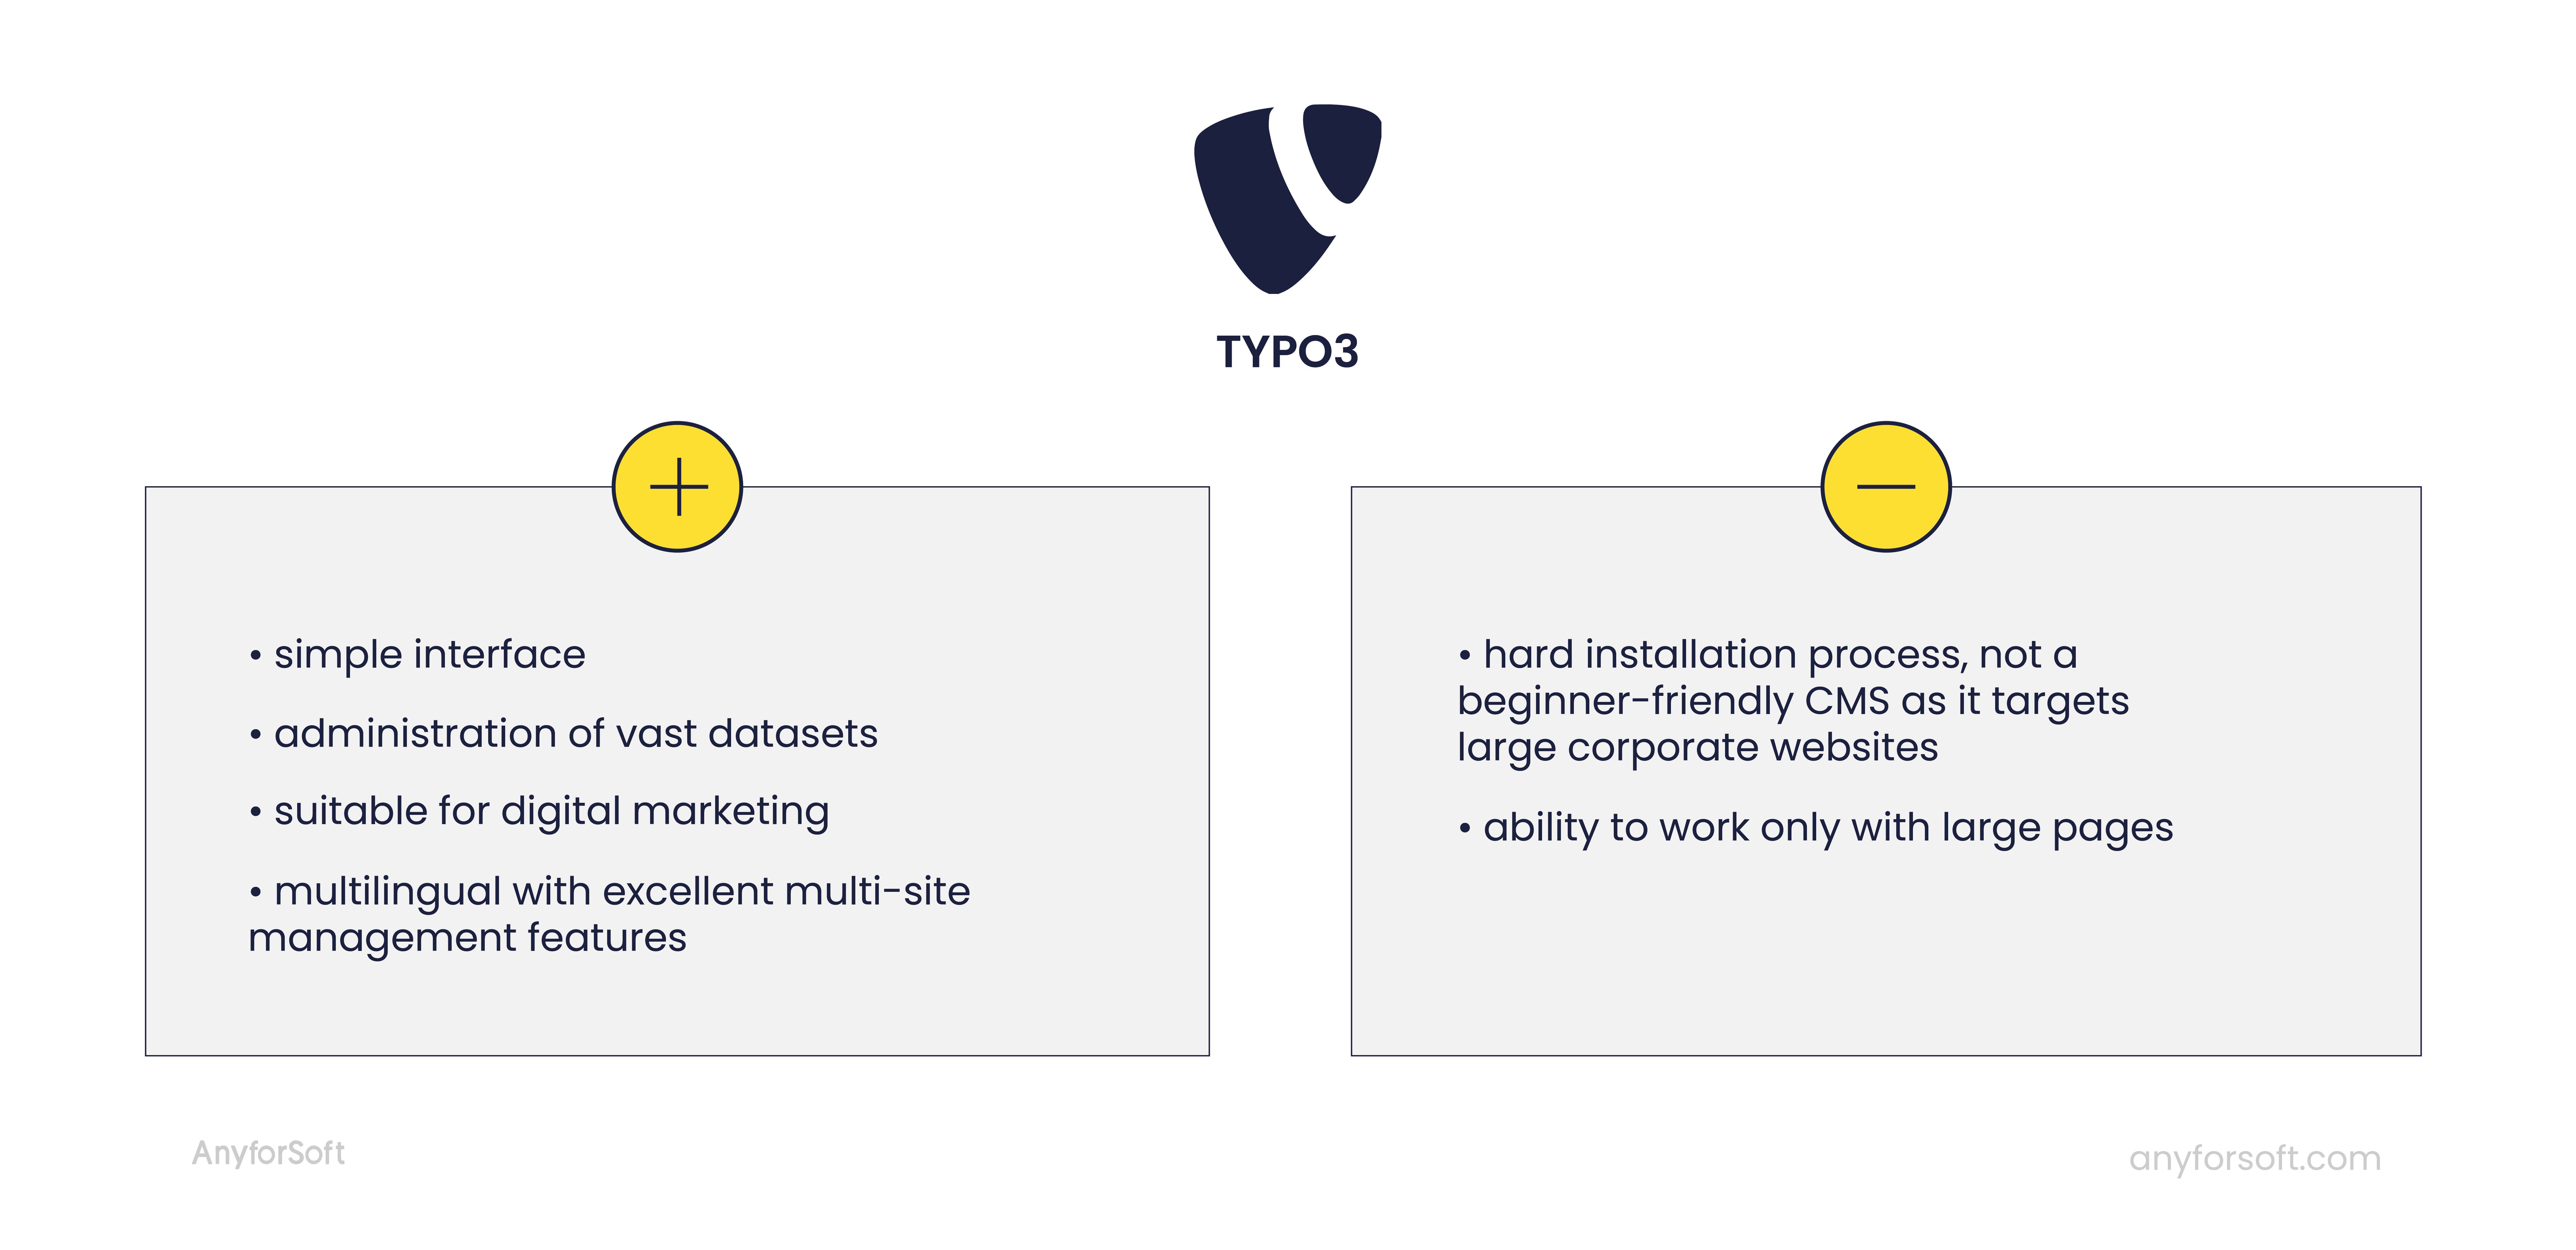 typo3 pros and cons